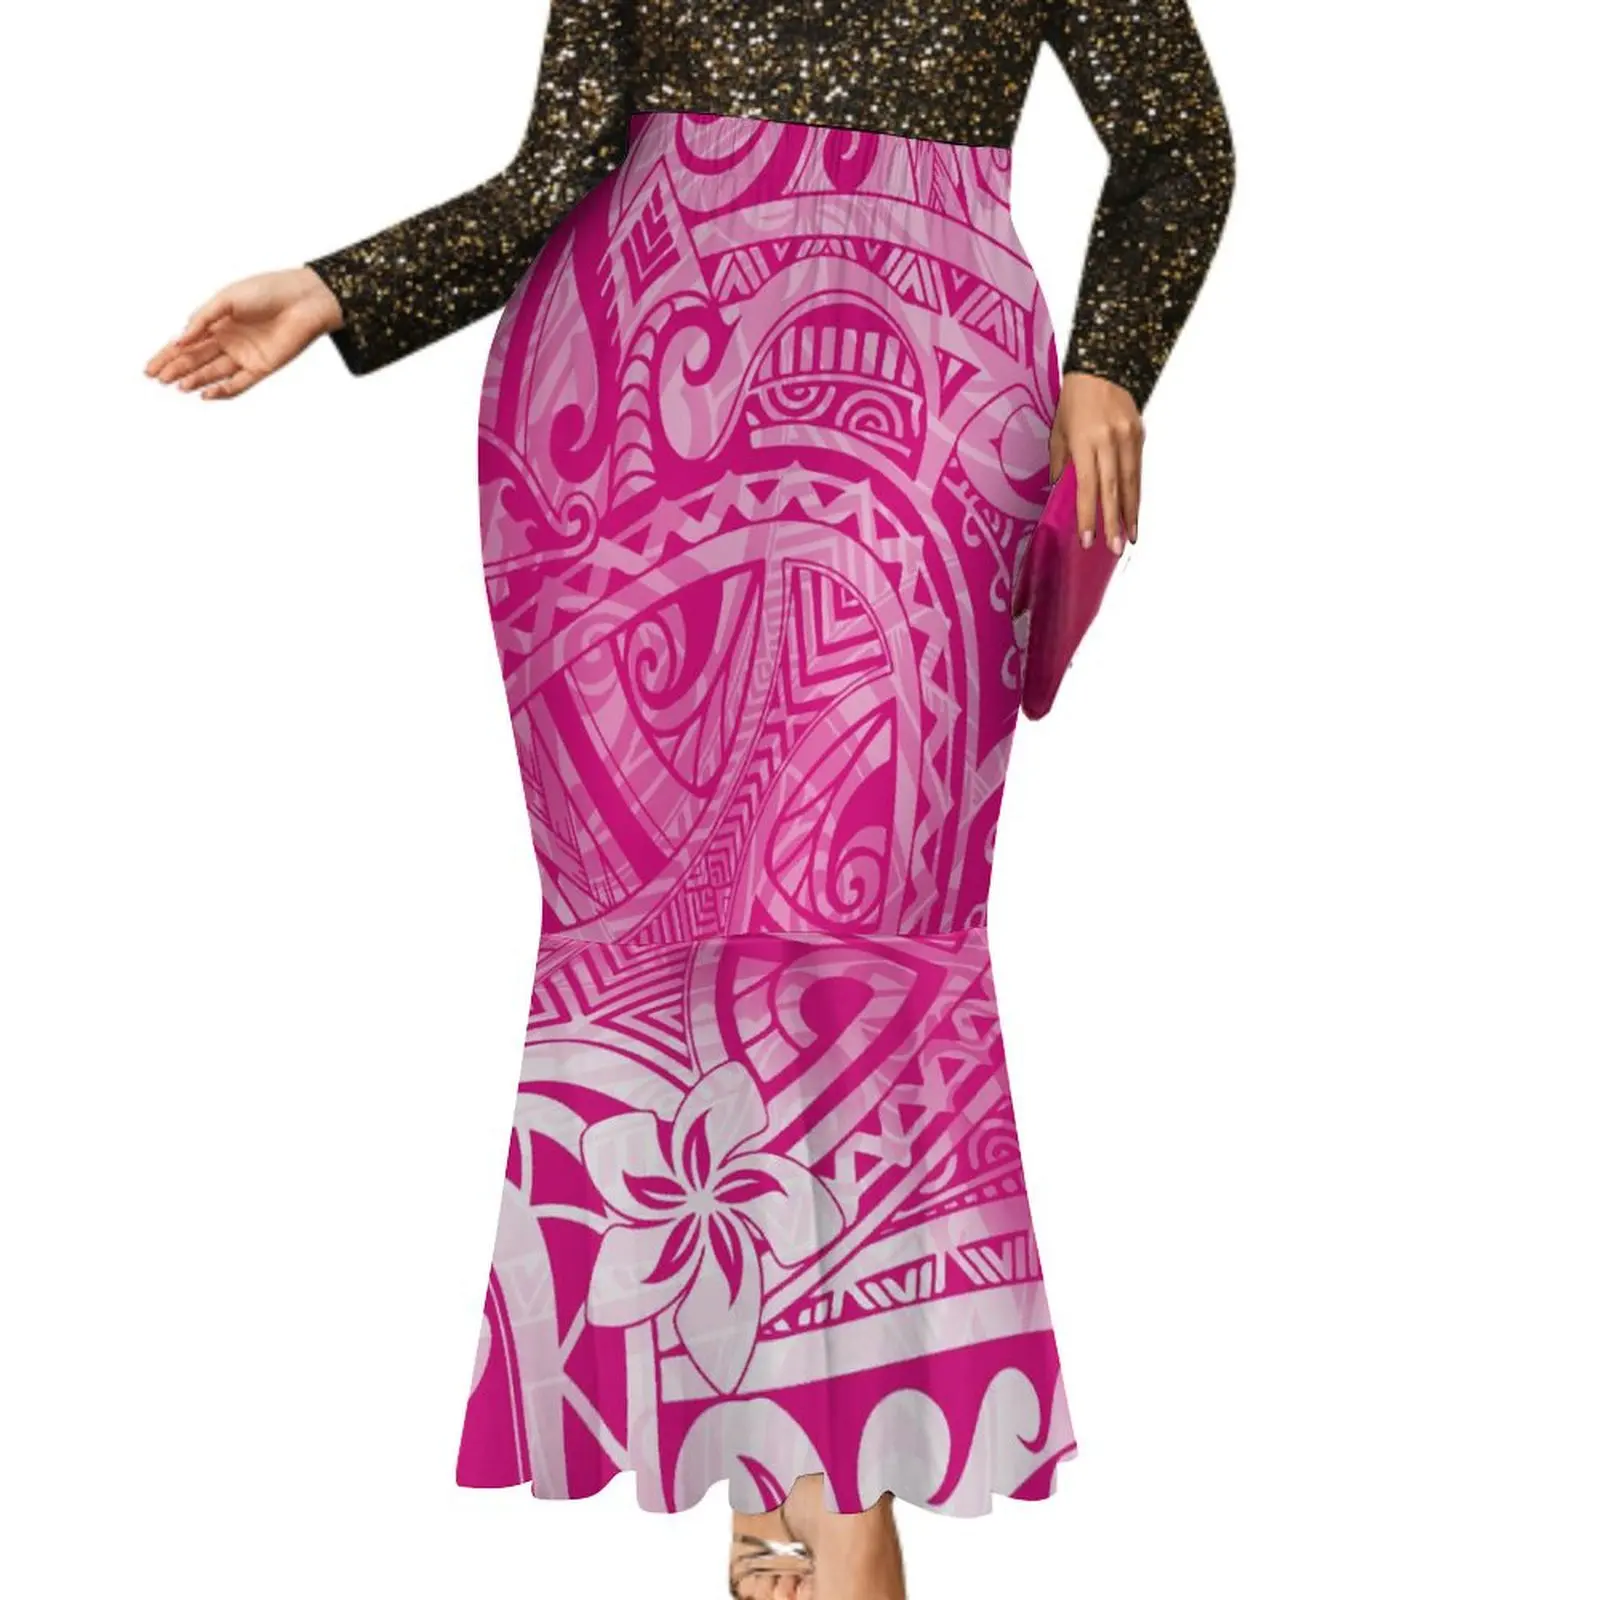 

High Quality Women'S Fishtail Skirt Polynesian Tribal Design Patterns Samoan Fashion With A Skirt Party Tight Maxi Dress